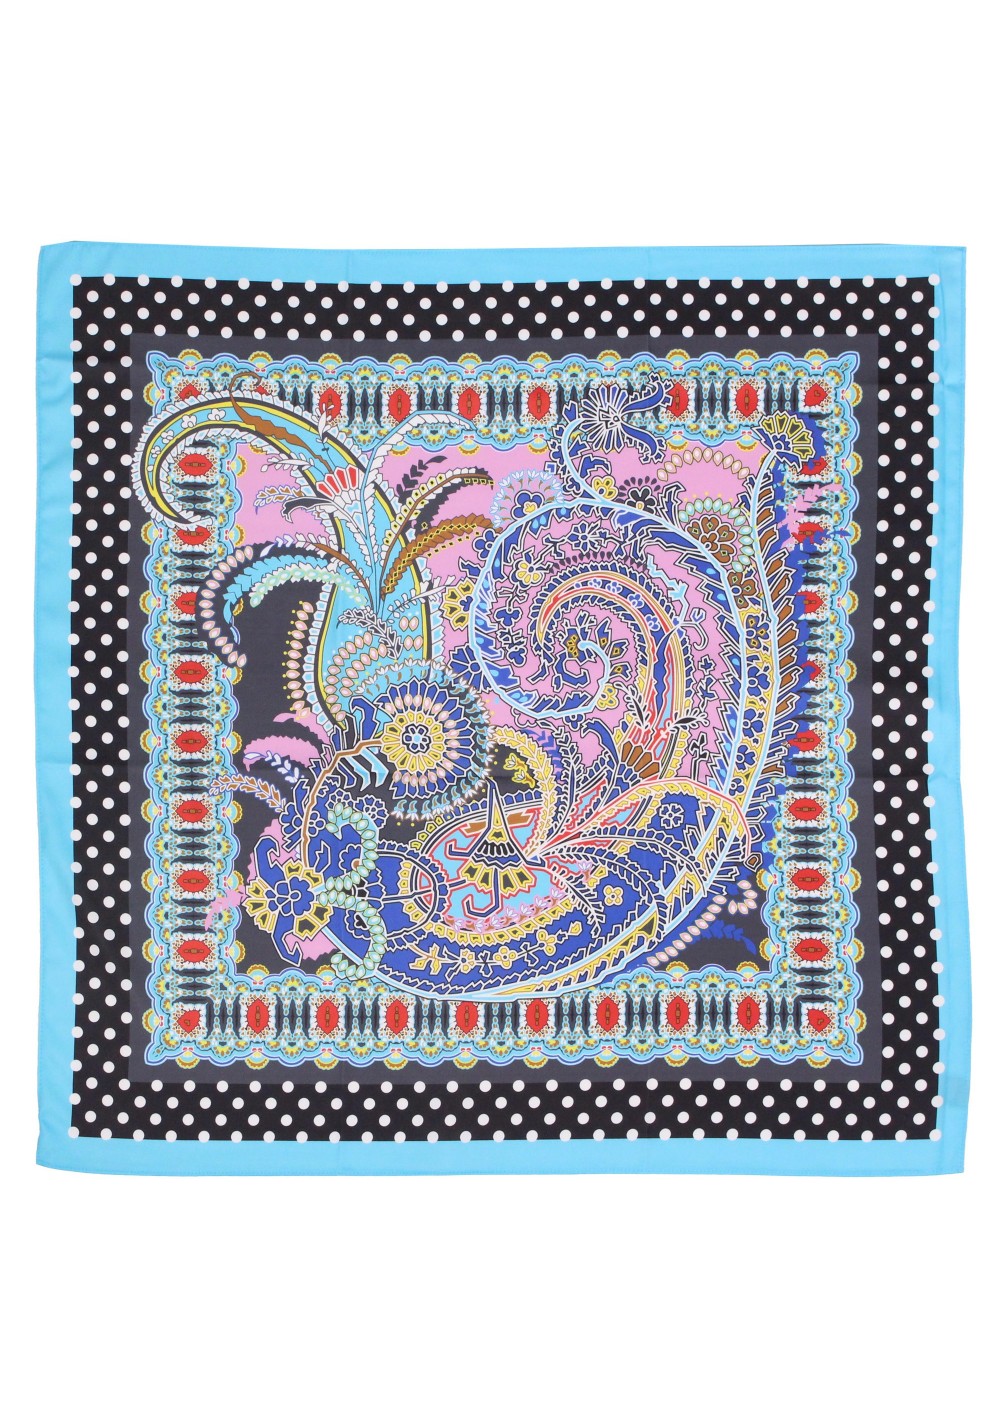 Scarf in Aqua Blue and Pink | Paisley Print Ladies Neck Scarf in Pink ...